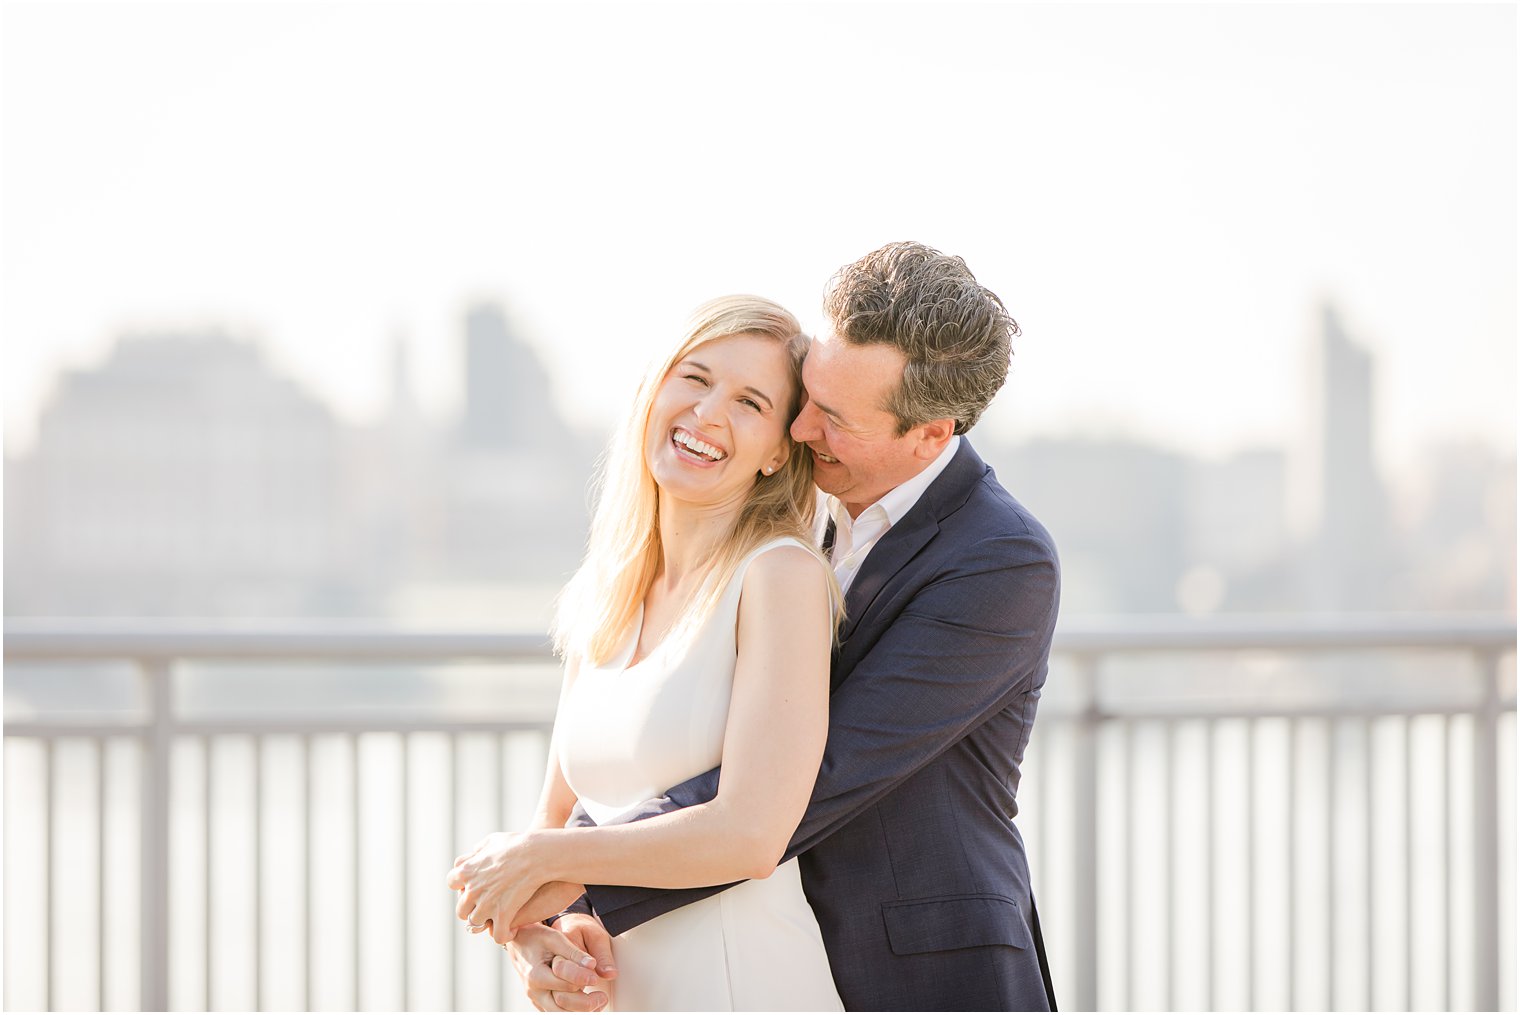 Laughing bride during Hoboken Rooftop Engagement by Idalia Photography